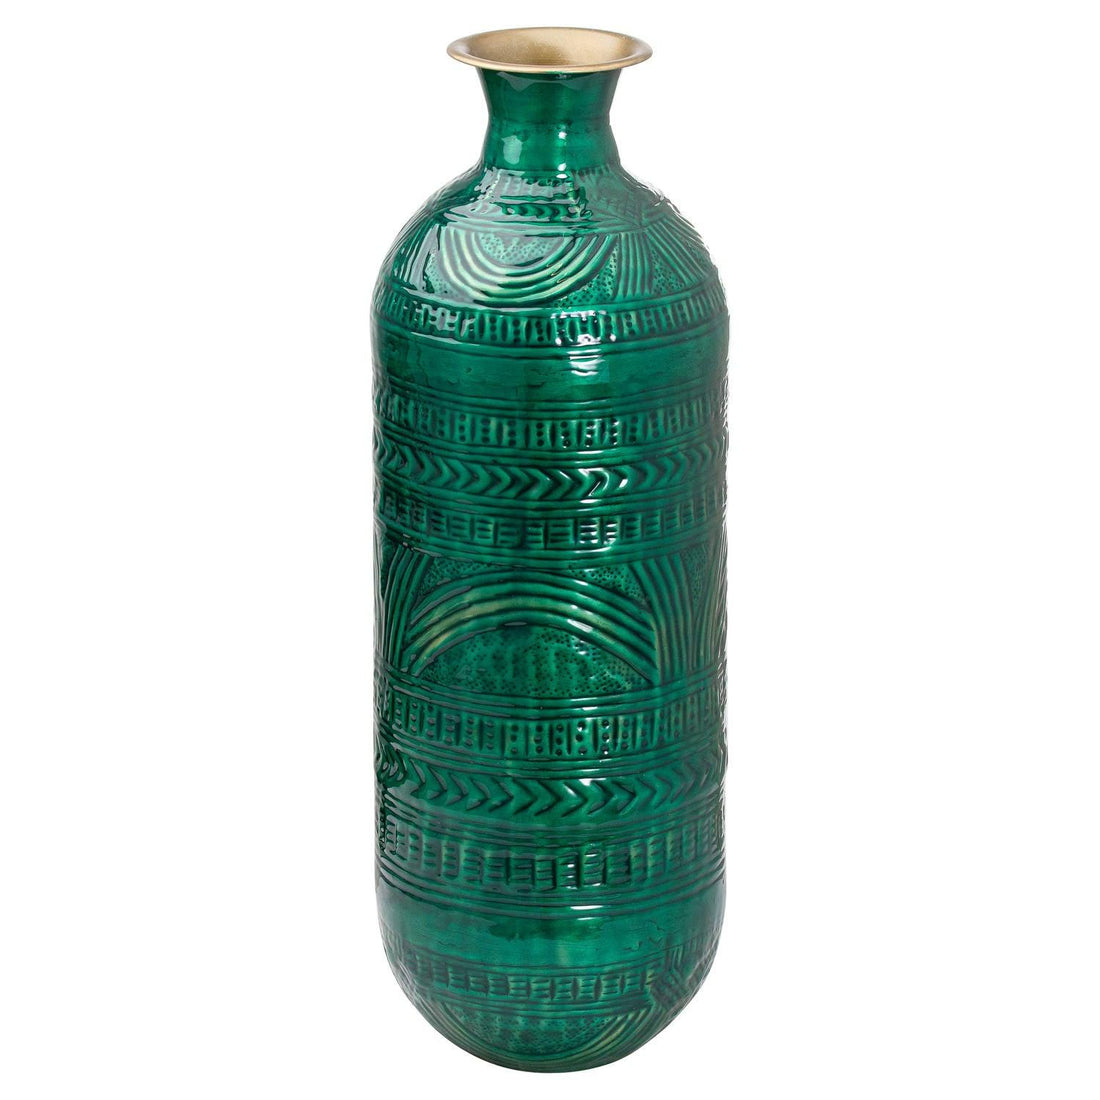 Aztec Collection Brass Embossed Ceramic Dipped Lebes Vase - £104.95 - Gifts & Accessories > Vases 